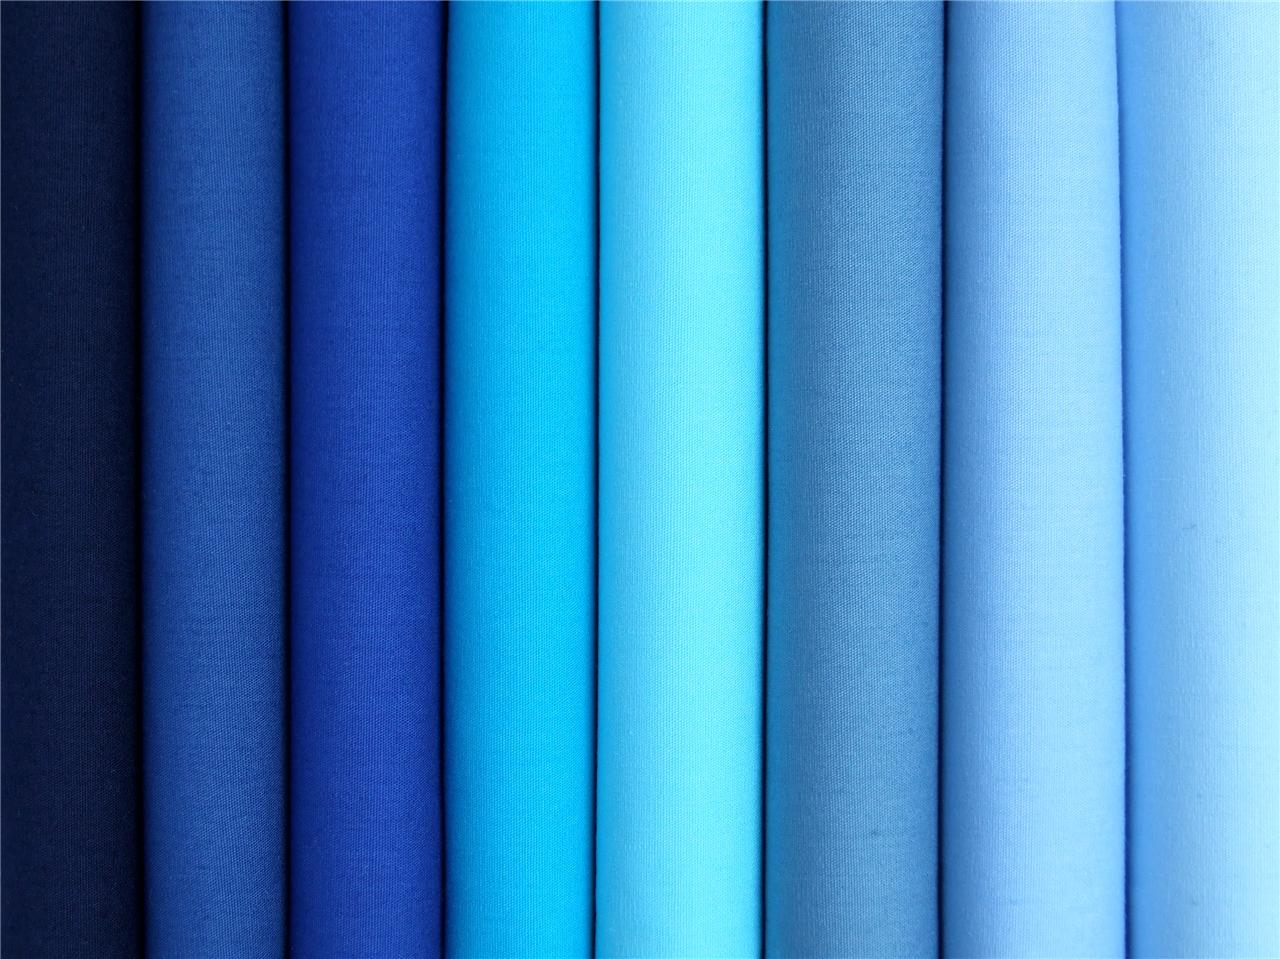 Kate Fabric for Uniforms: Learn All About This Popular Fabric